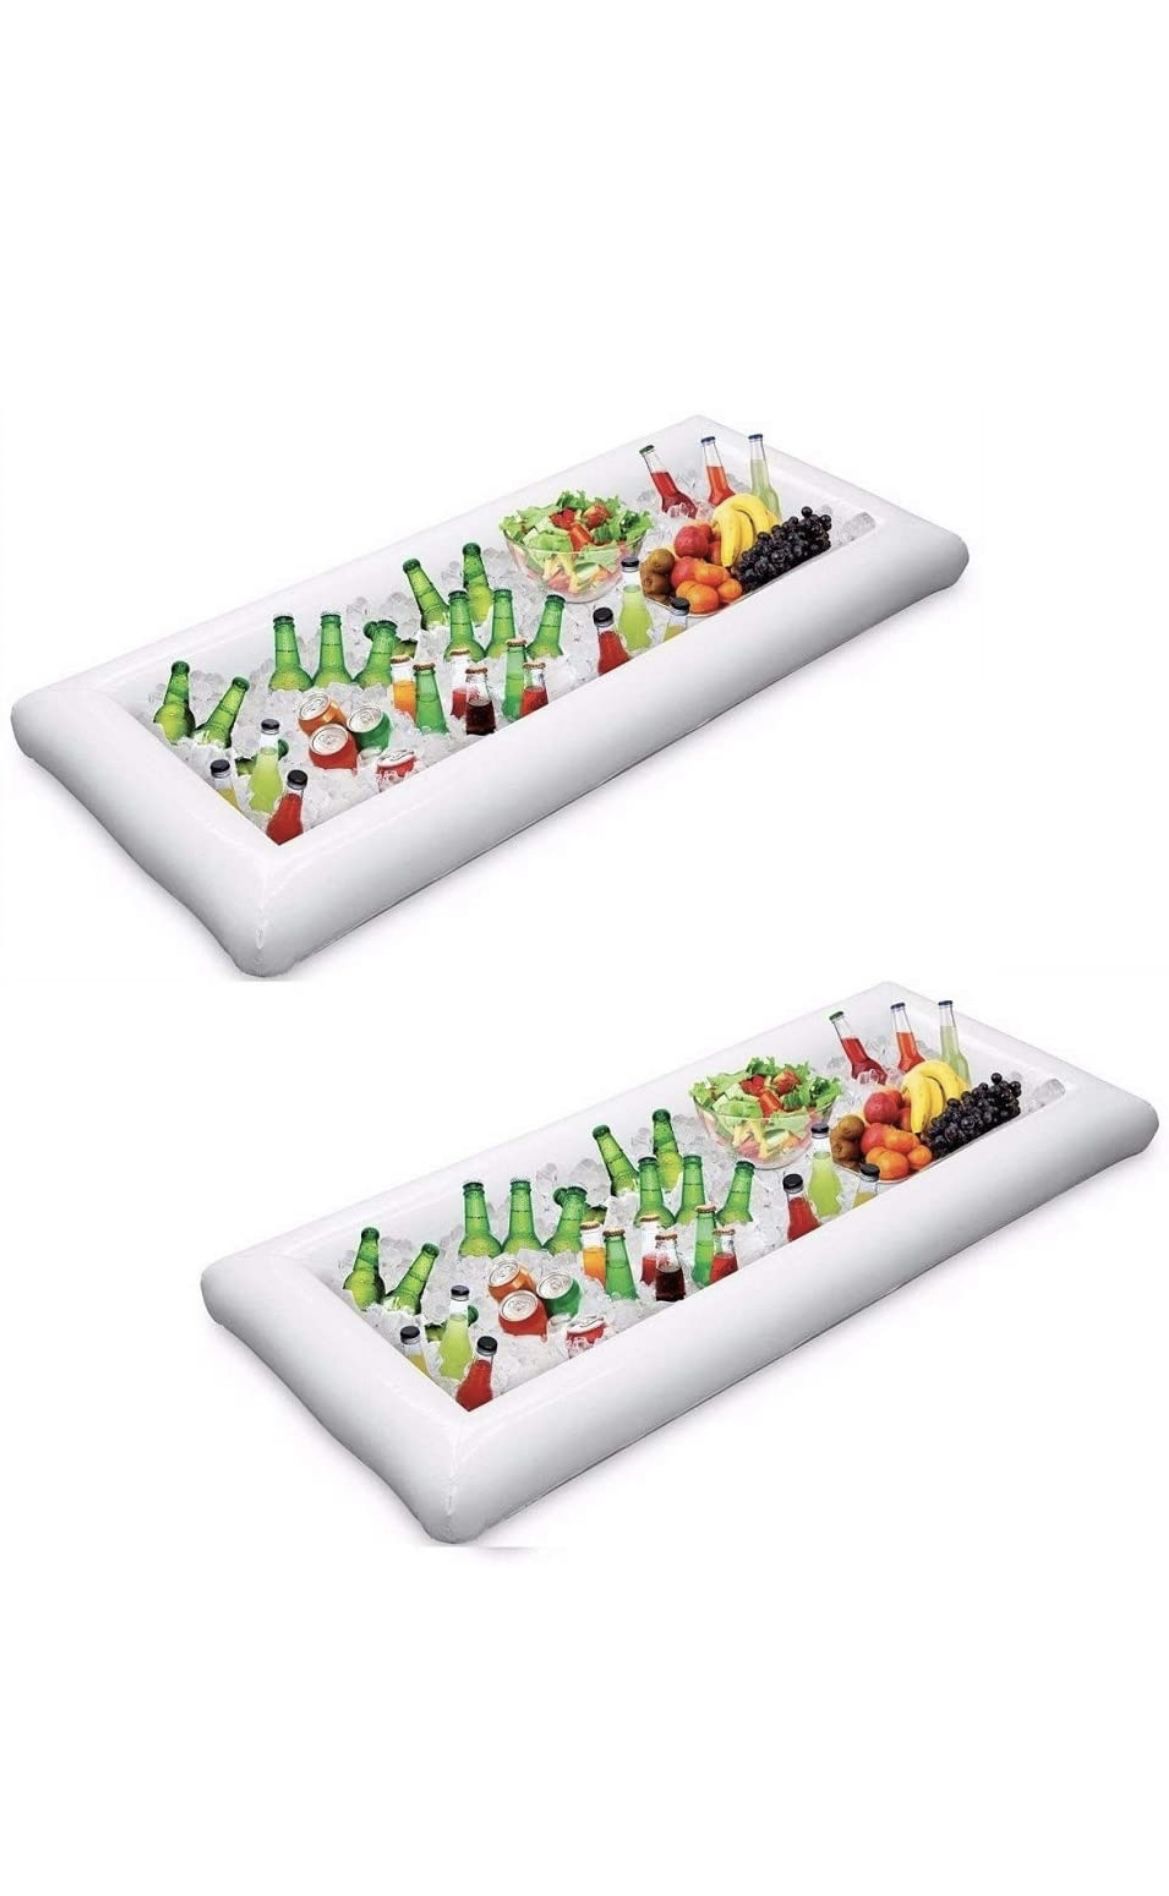 2 Packs Inflatable Pool Table Serving Bar -for Parties Indoor & Outdoor Use